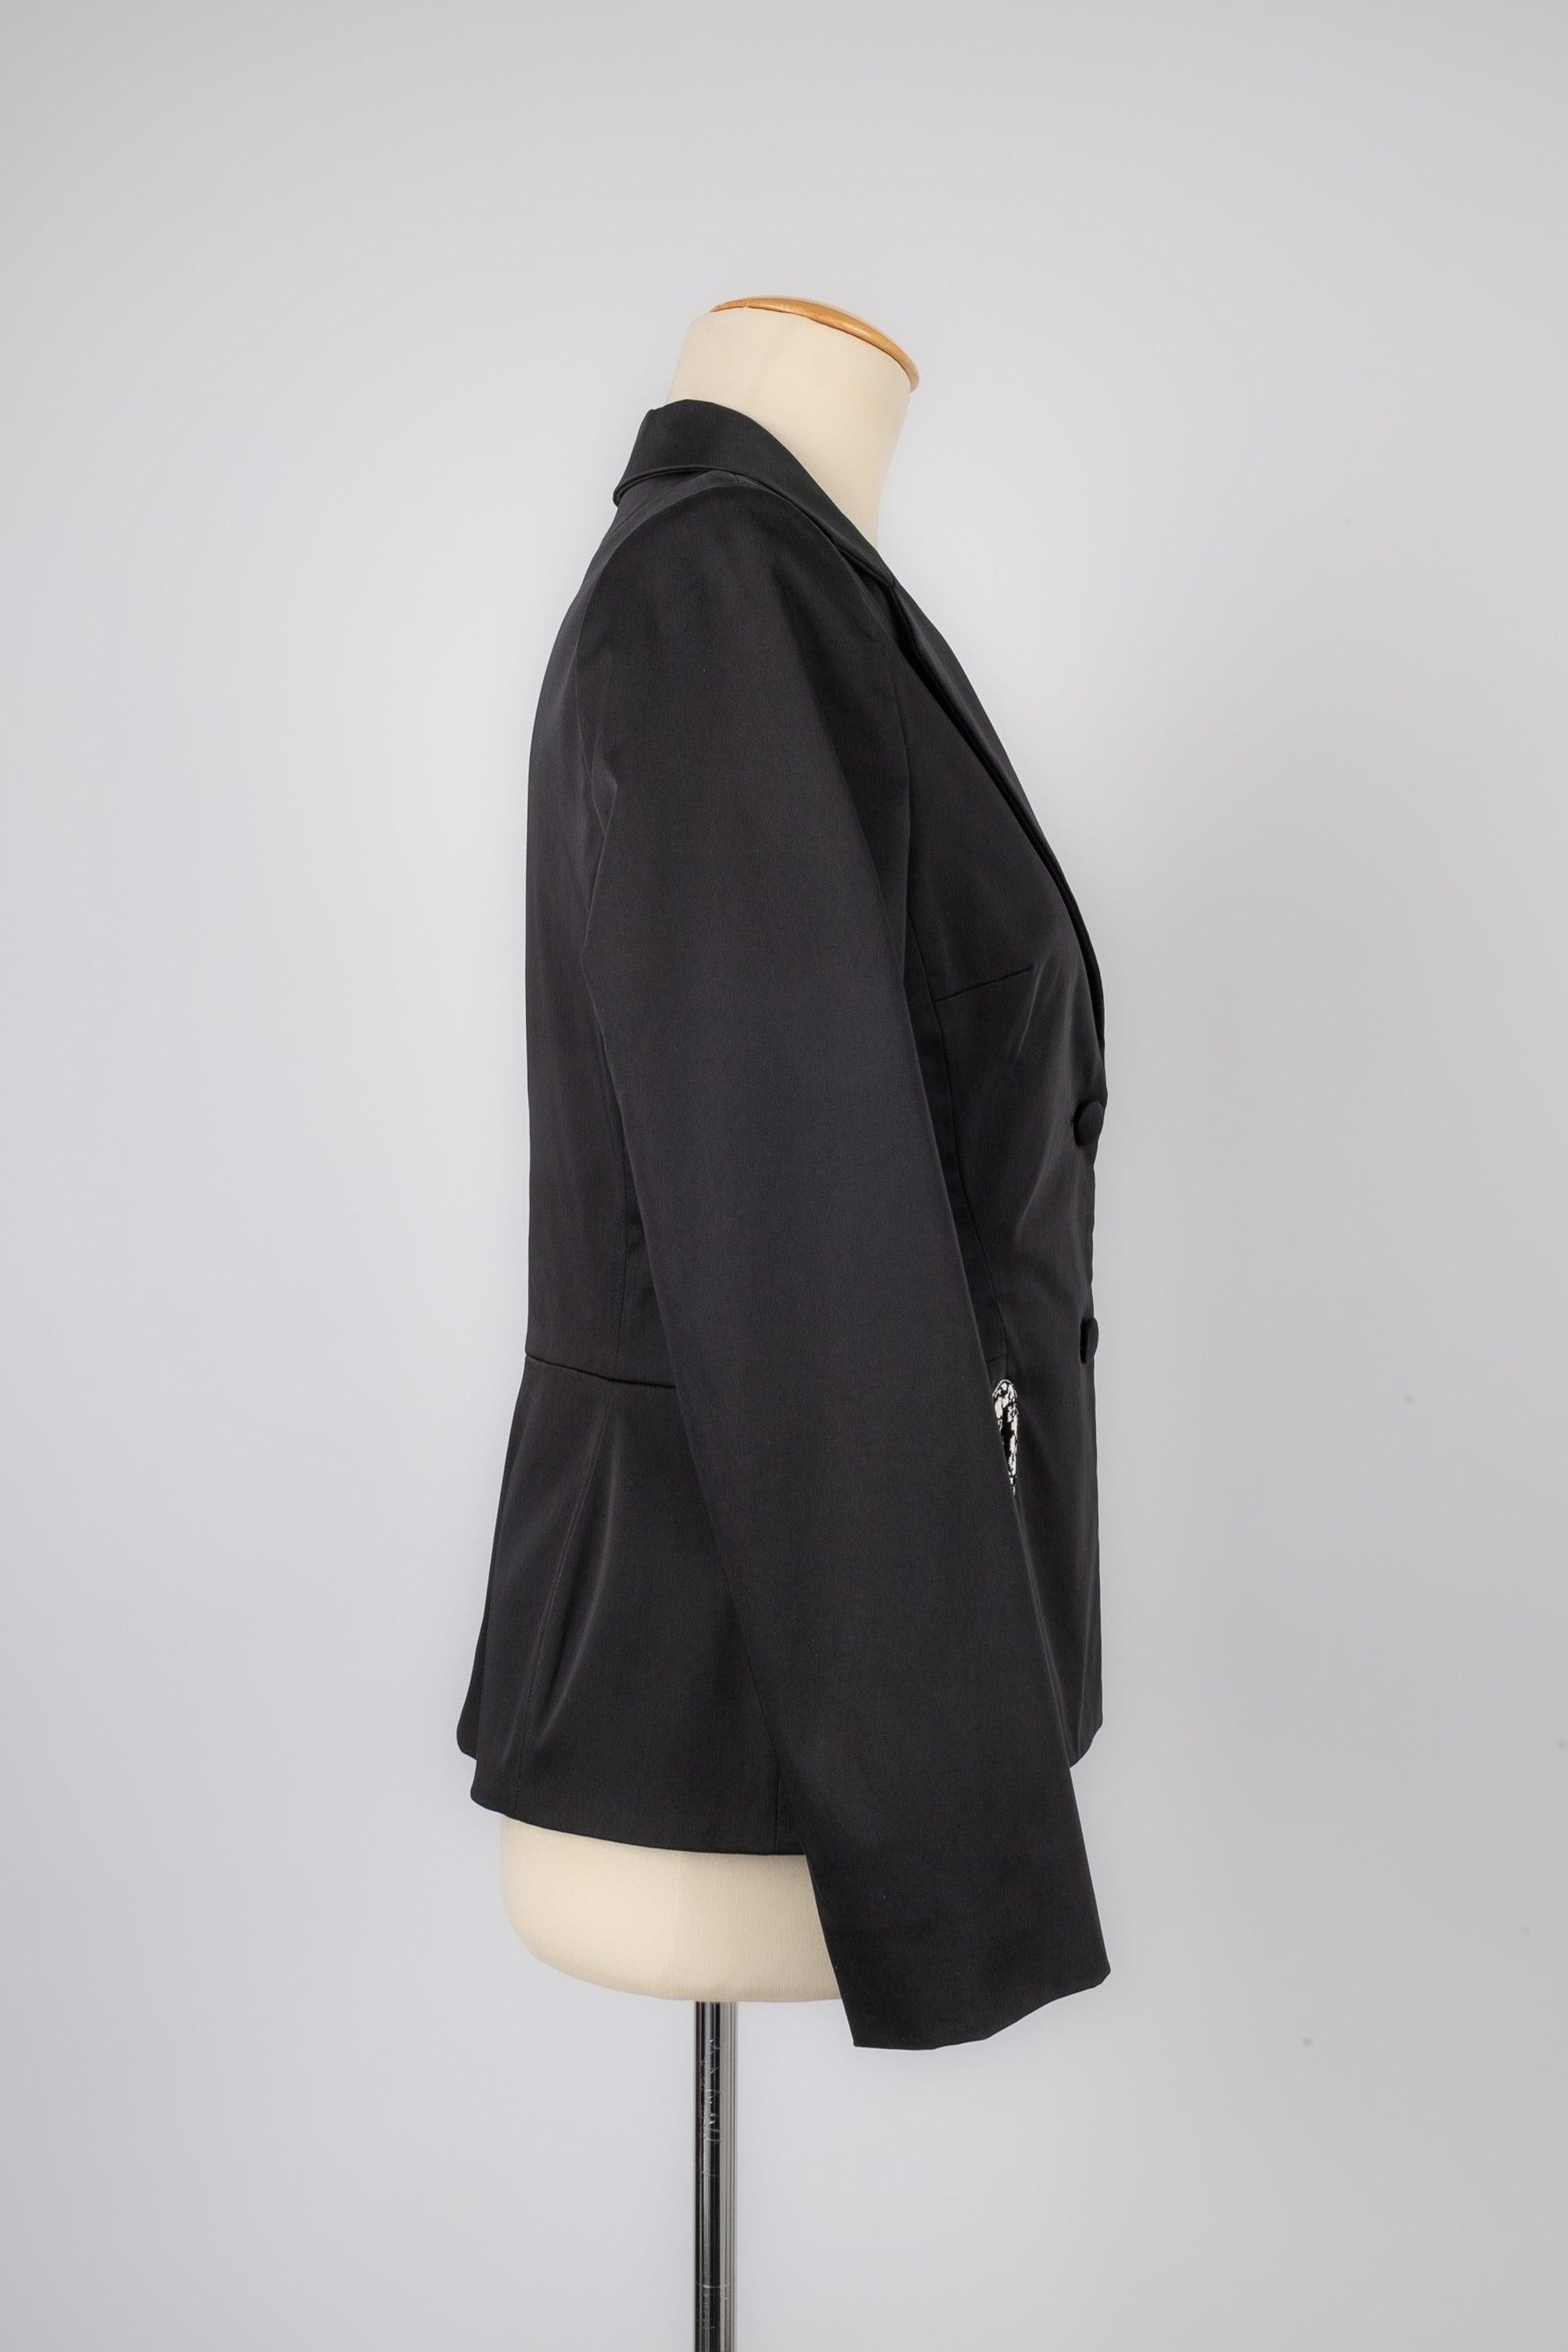 Women's Christian Dior Black Blended Cotton Jacket, circa 2005 For Sale